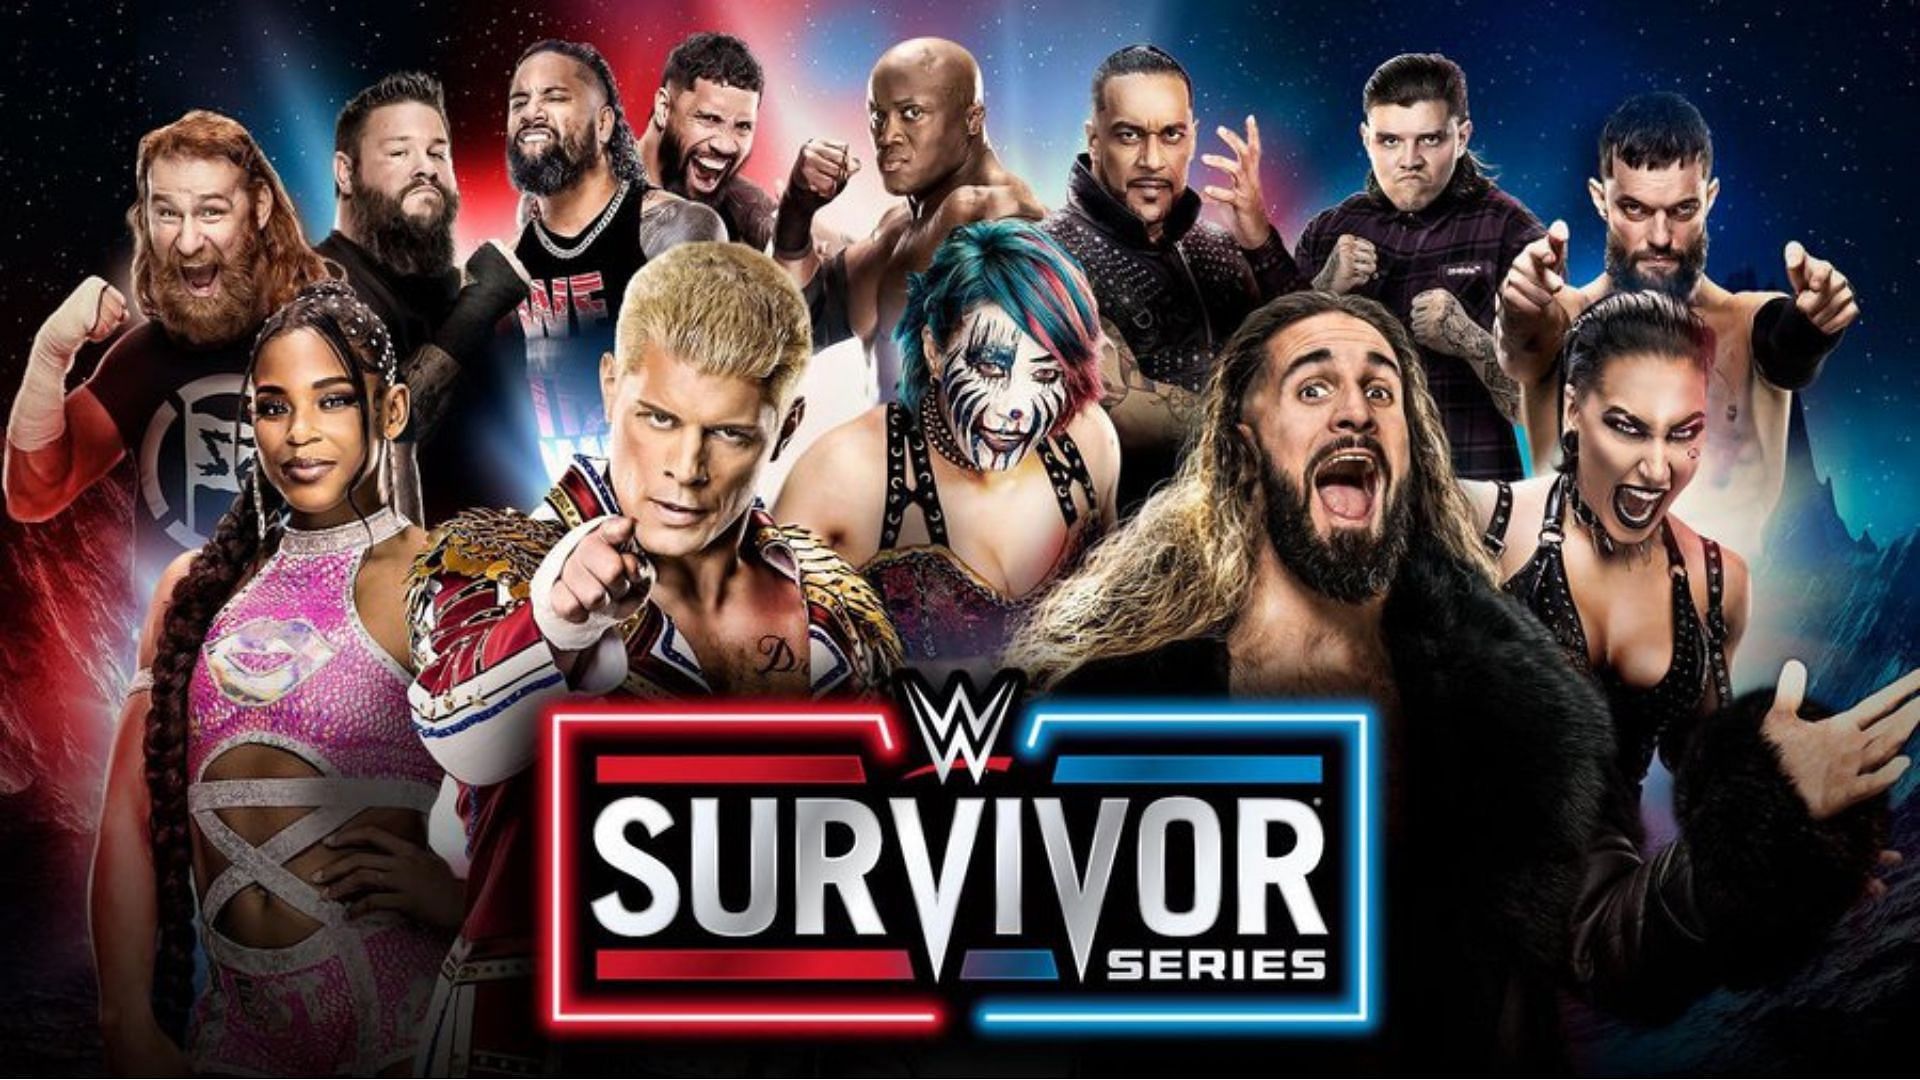 WWE Survivor Series 2023 is shaping up to be a memorable event.